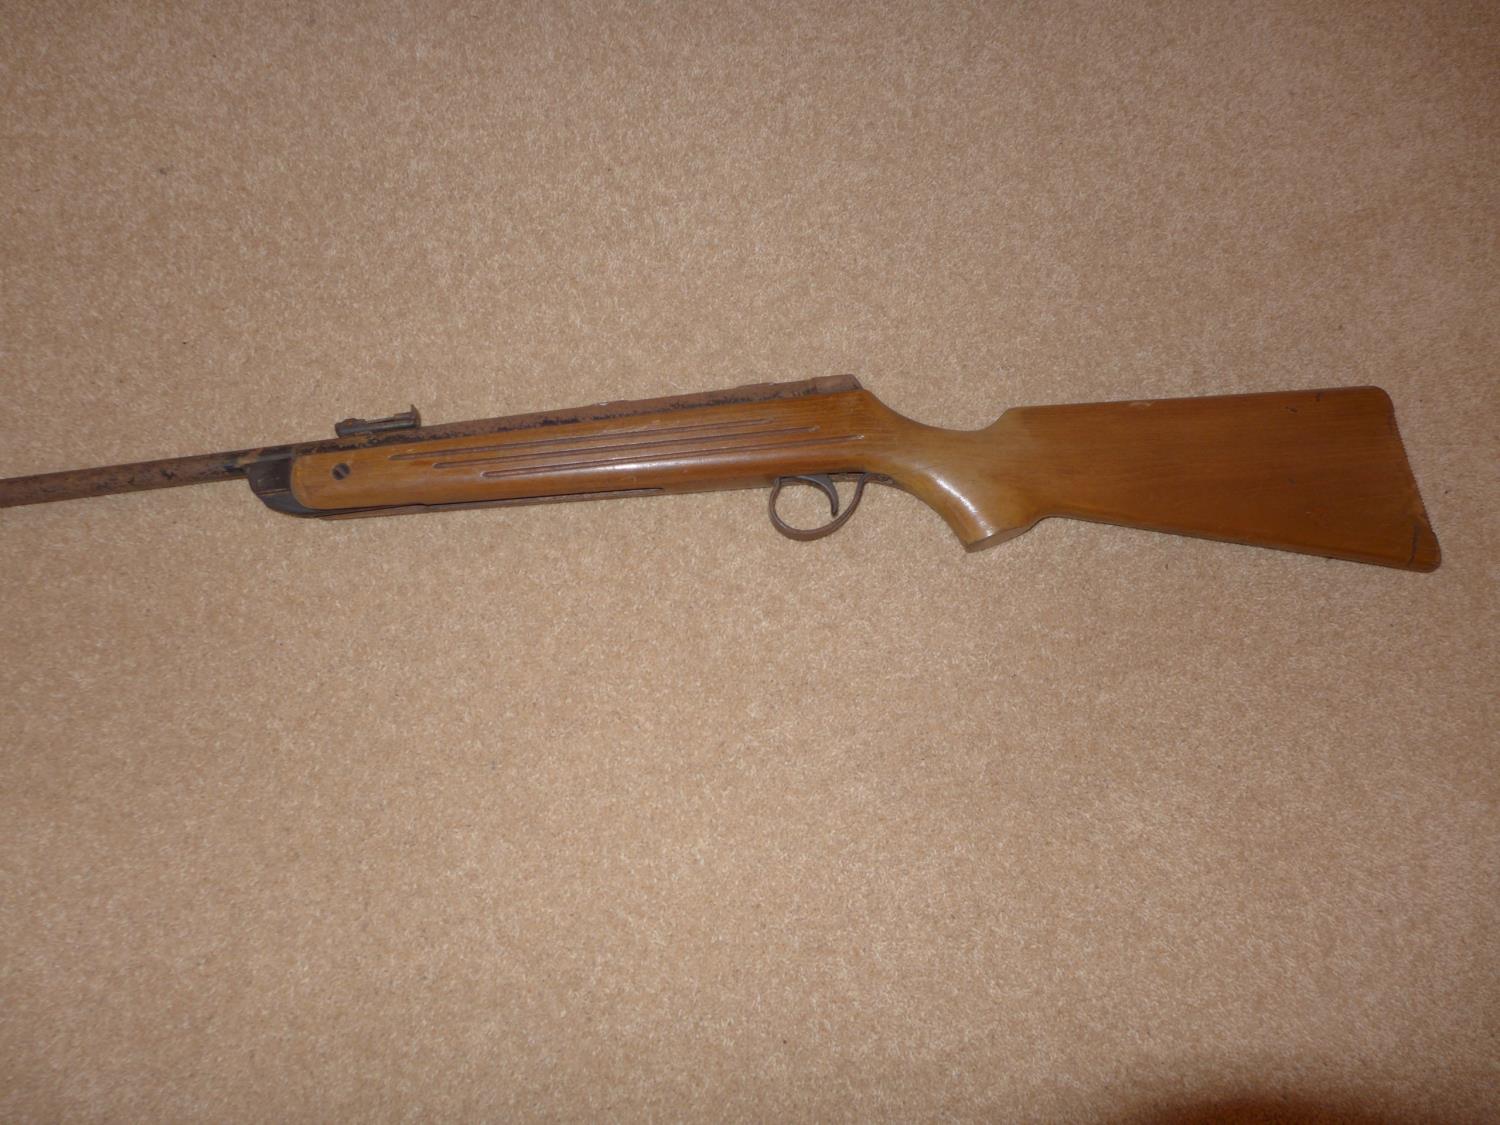 A B.S.A. METEOR .22 CALIBRE AIR RIFLE, 45.5CM BARREL (RUSTED) - Image 2 of 4